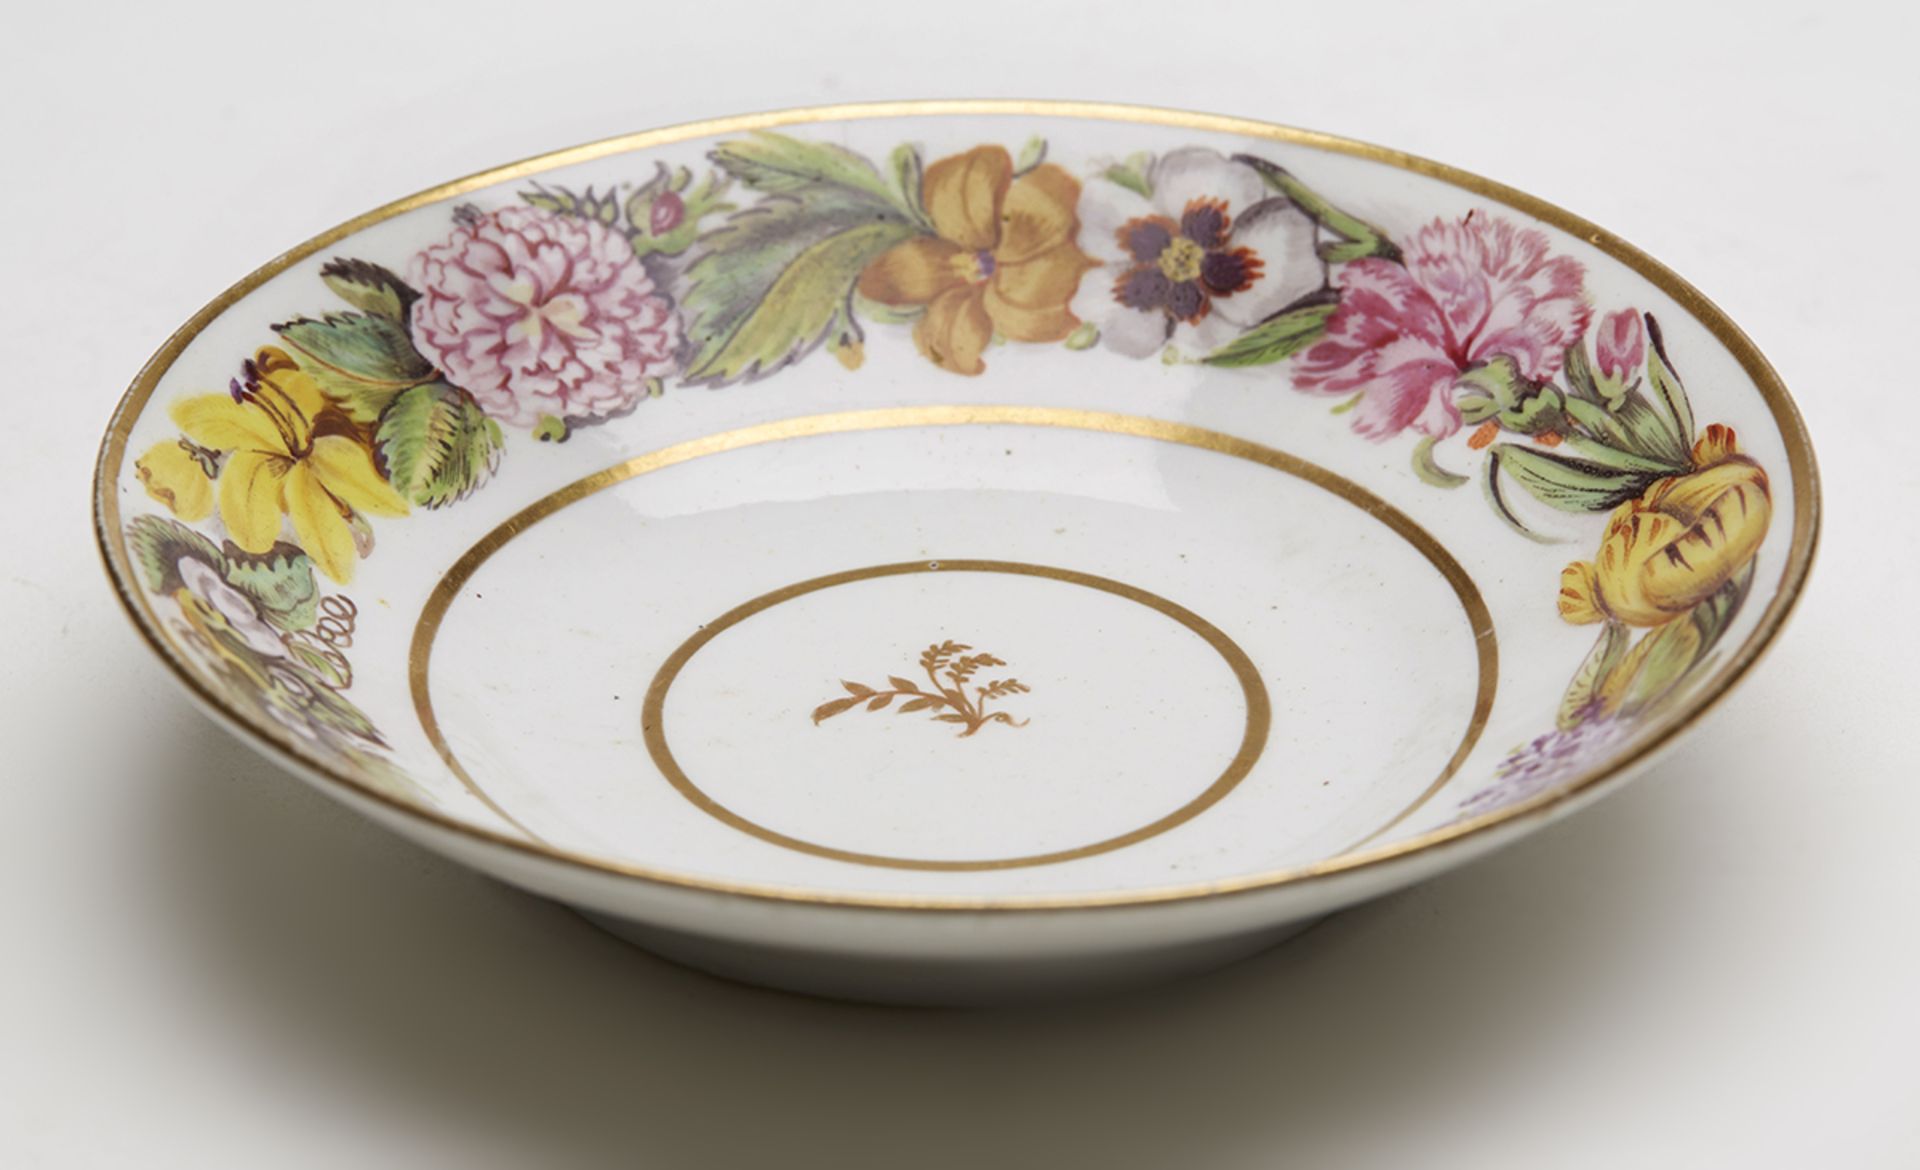 ANTIQUE FLORAL HAND PAINTED SAUCER C.1800 - Image 7 of 7